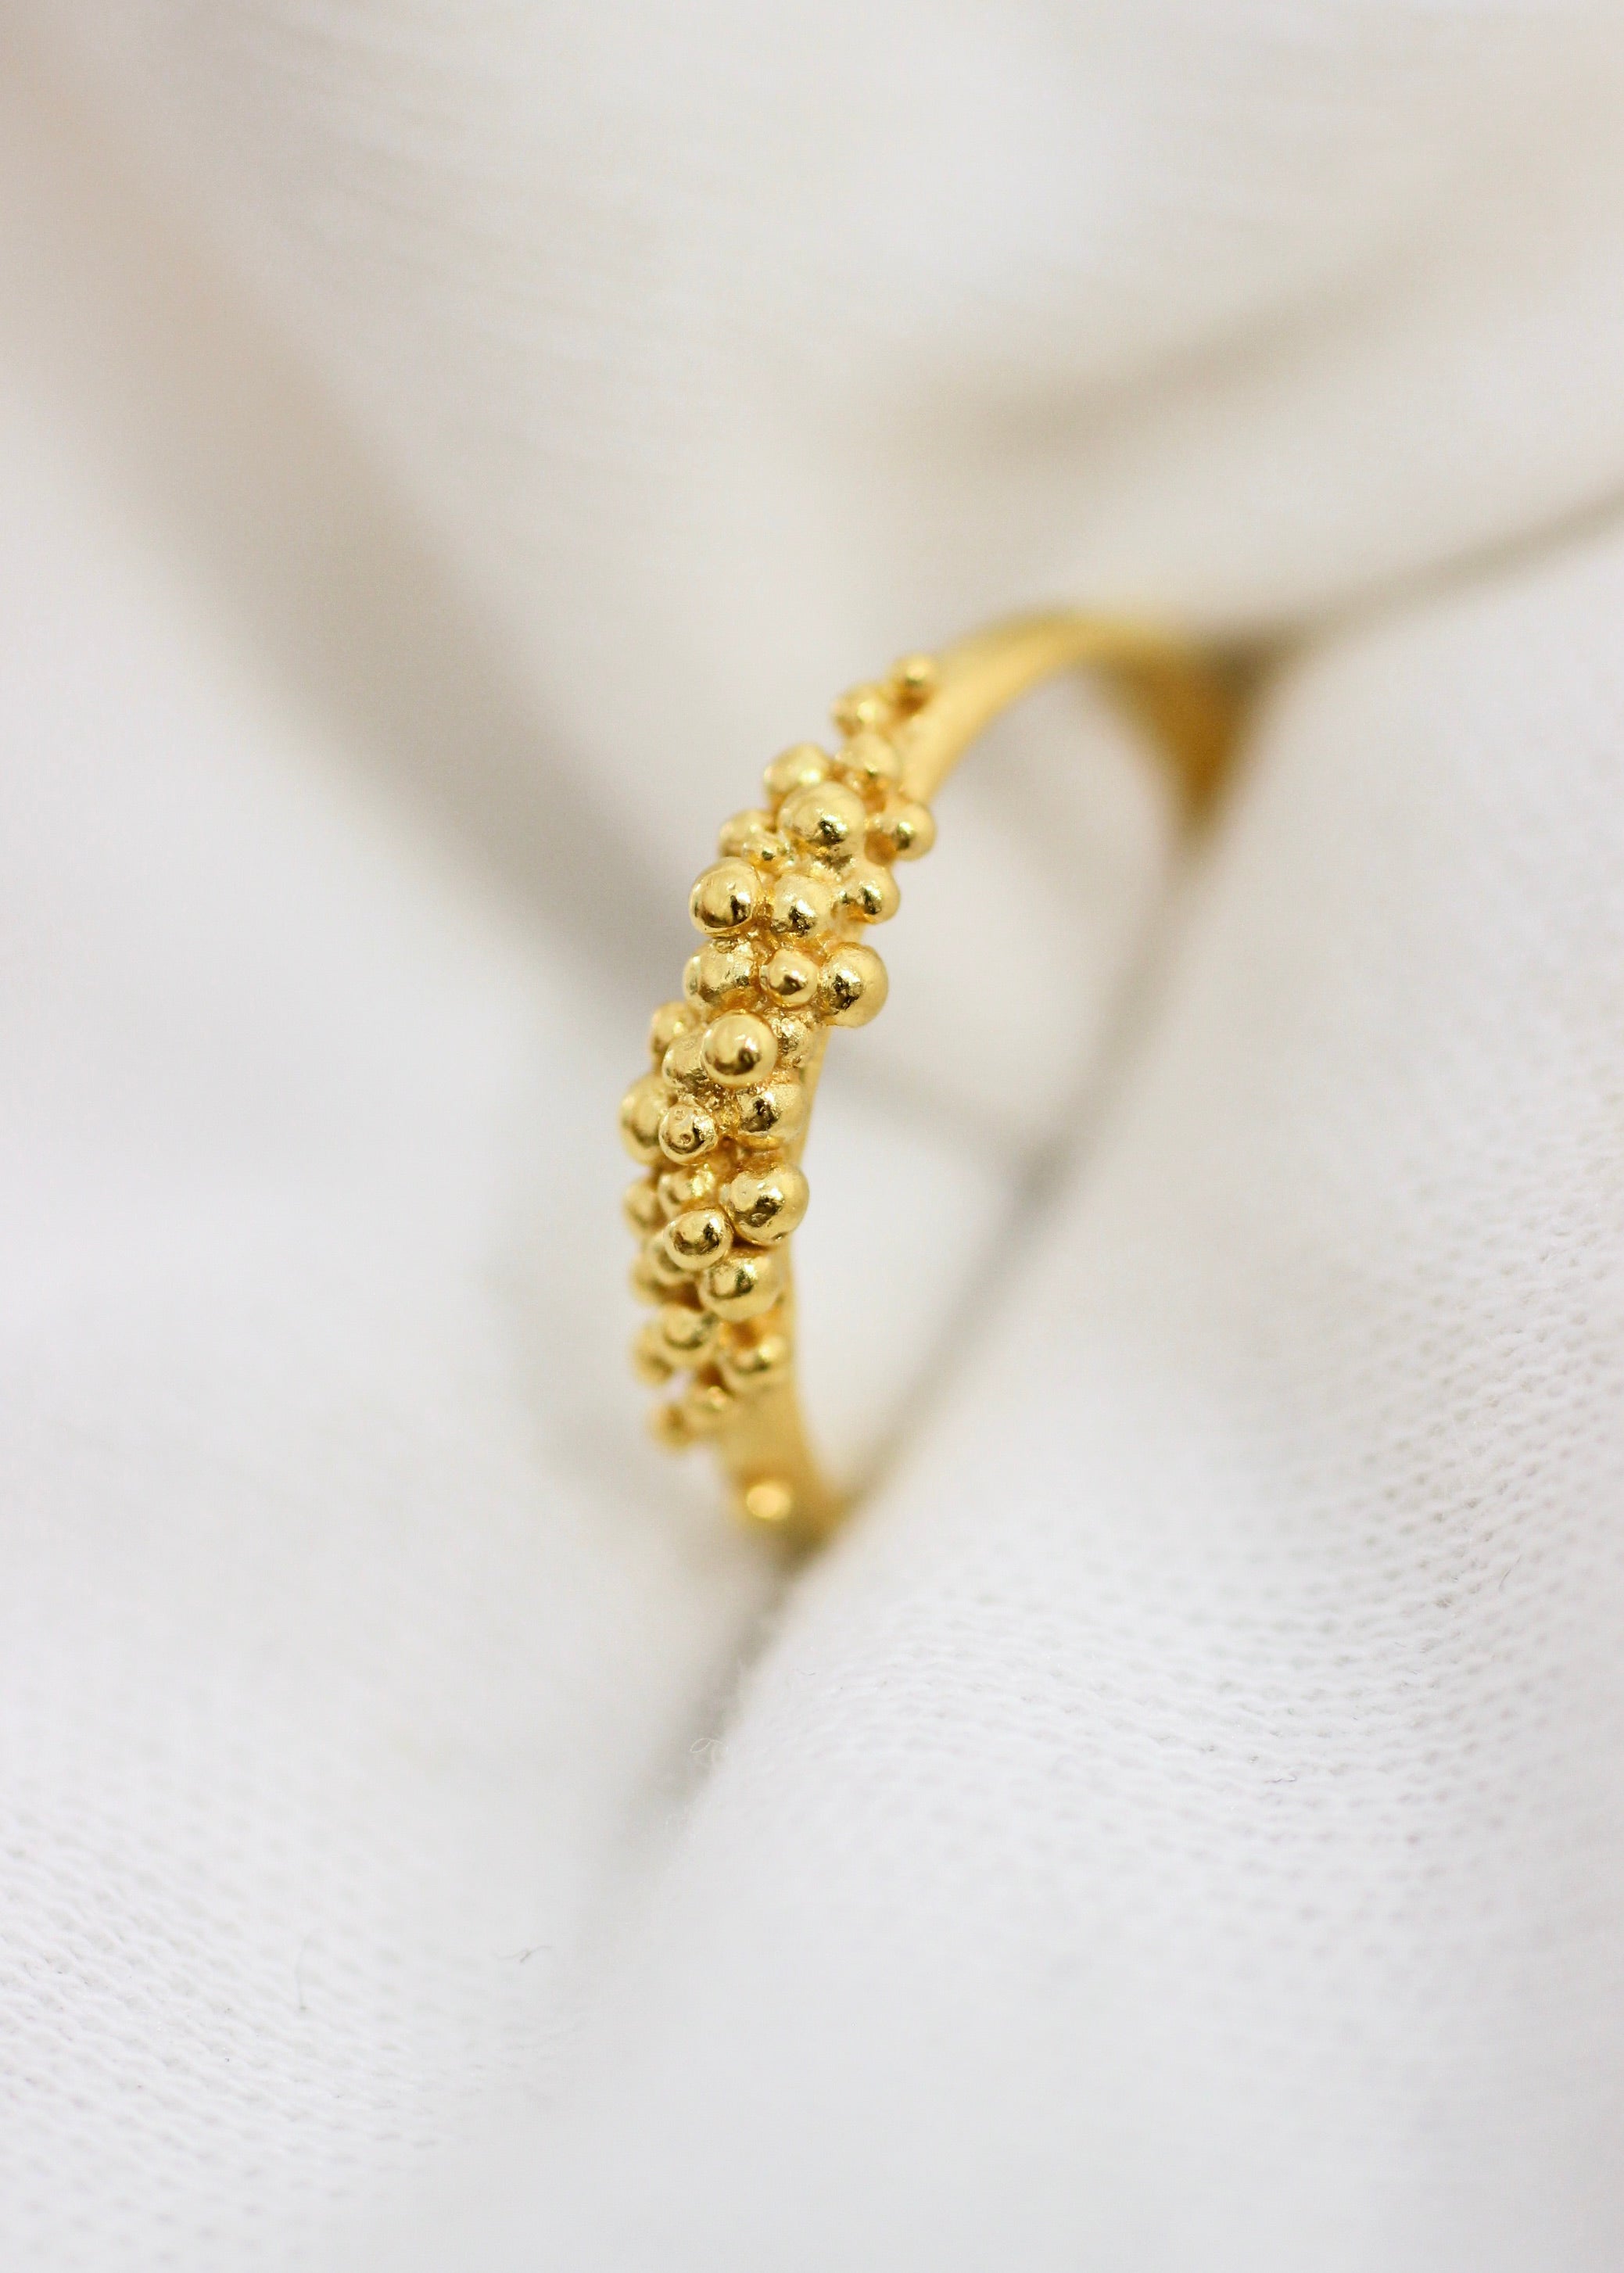 An 18K Yellow GOLD Essential Dot Ring by Cremilde Bispo Jewellery, a stunning addition to any jewellery collection. Featuring a delicate flower design, this gold plated ring is both elegant and stylish.